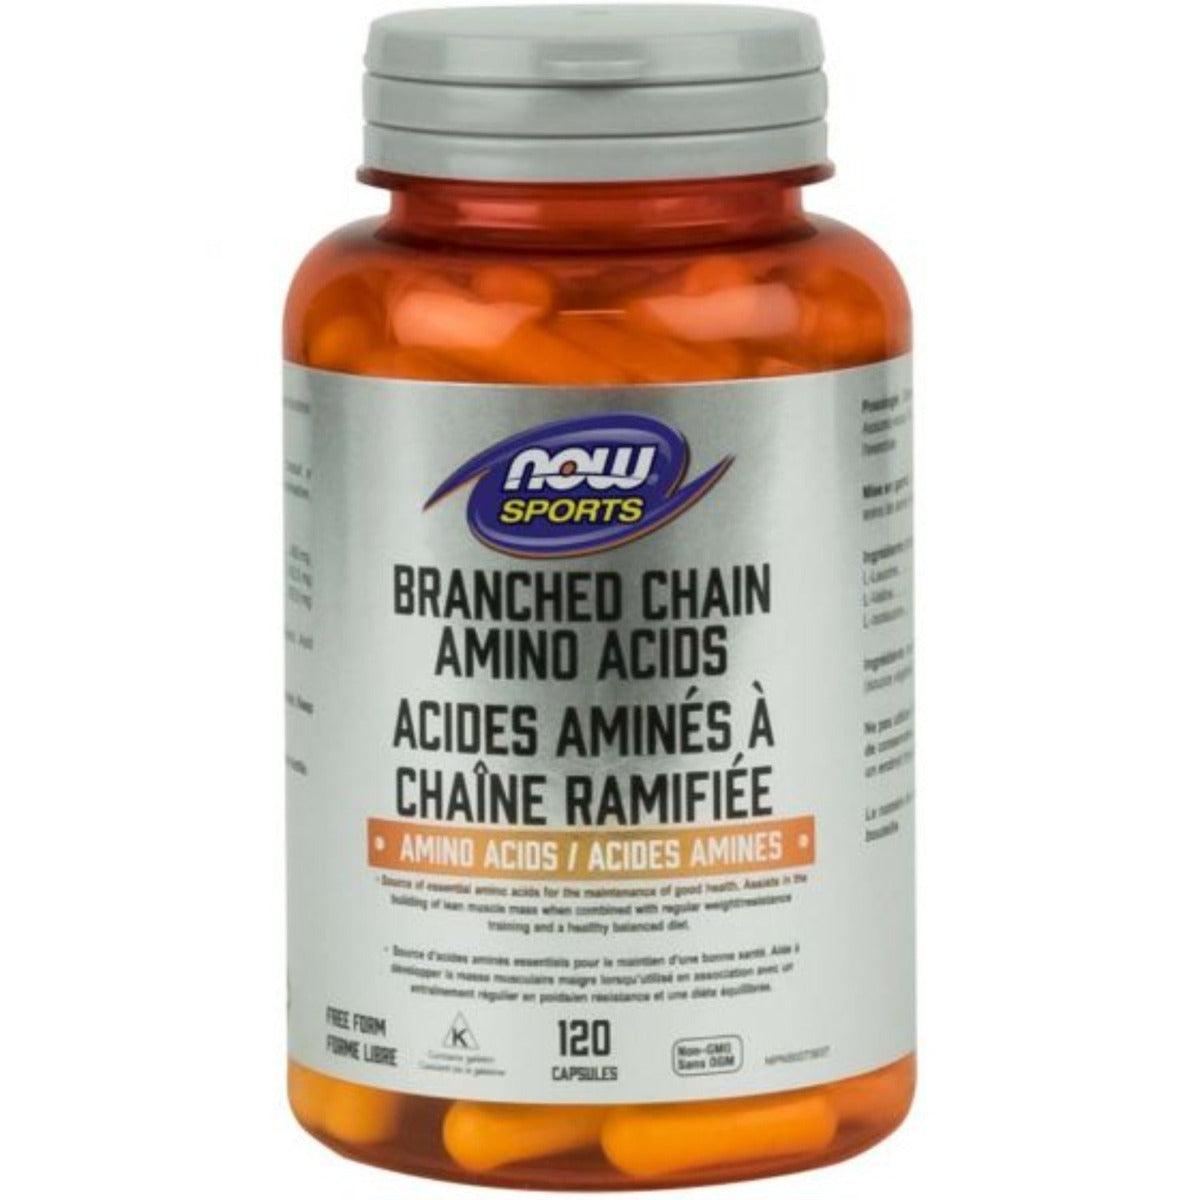 NOW Sports Branched Chain Amino Acids 120 Caps Supplements - Amino Acids at Village Vitamin Store